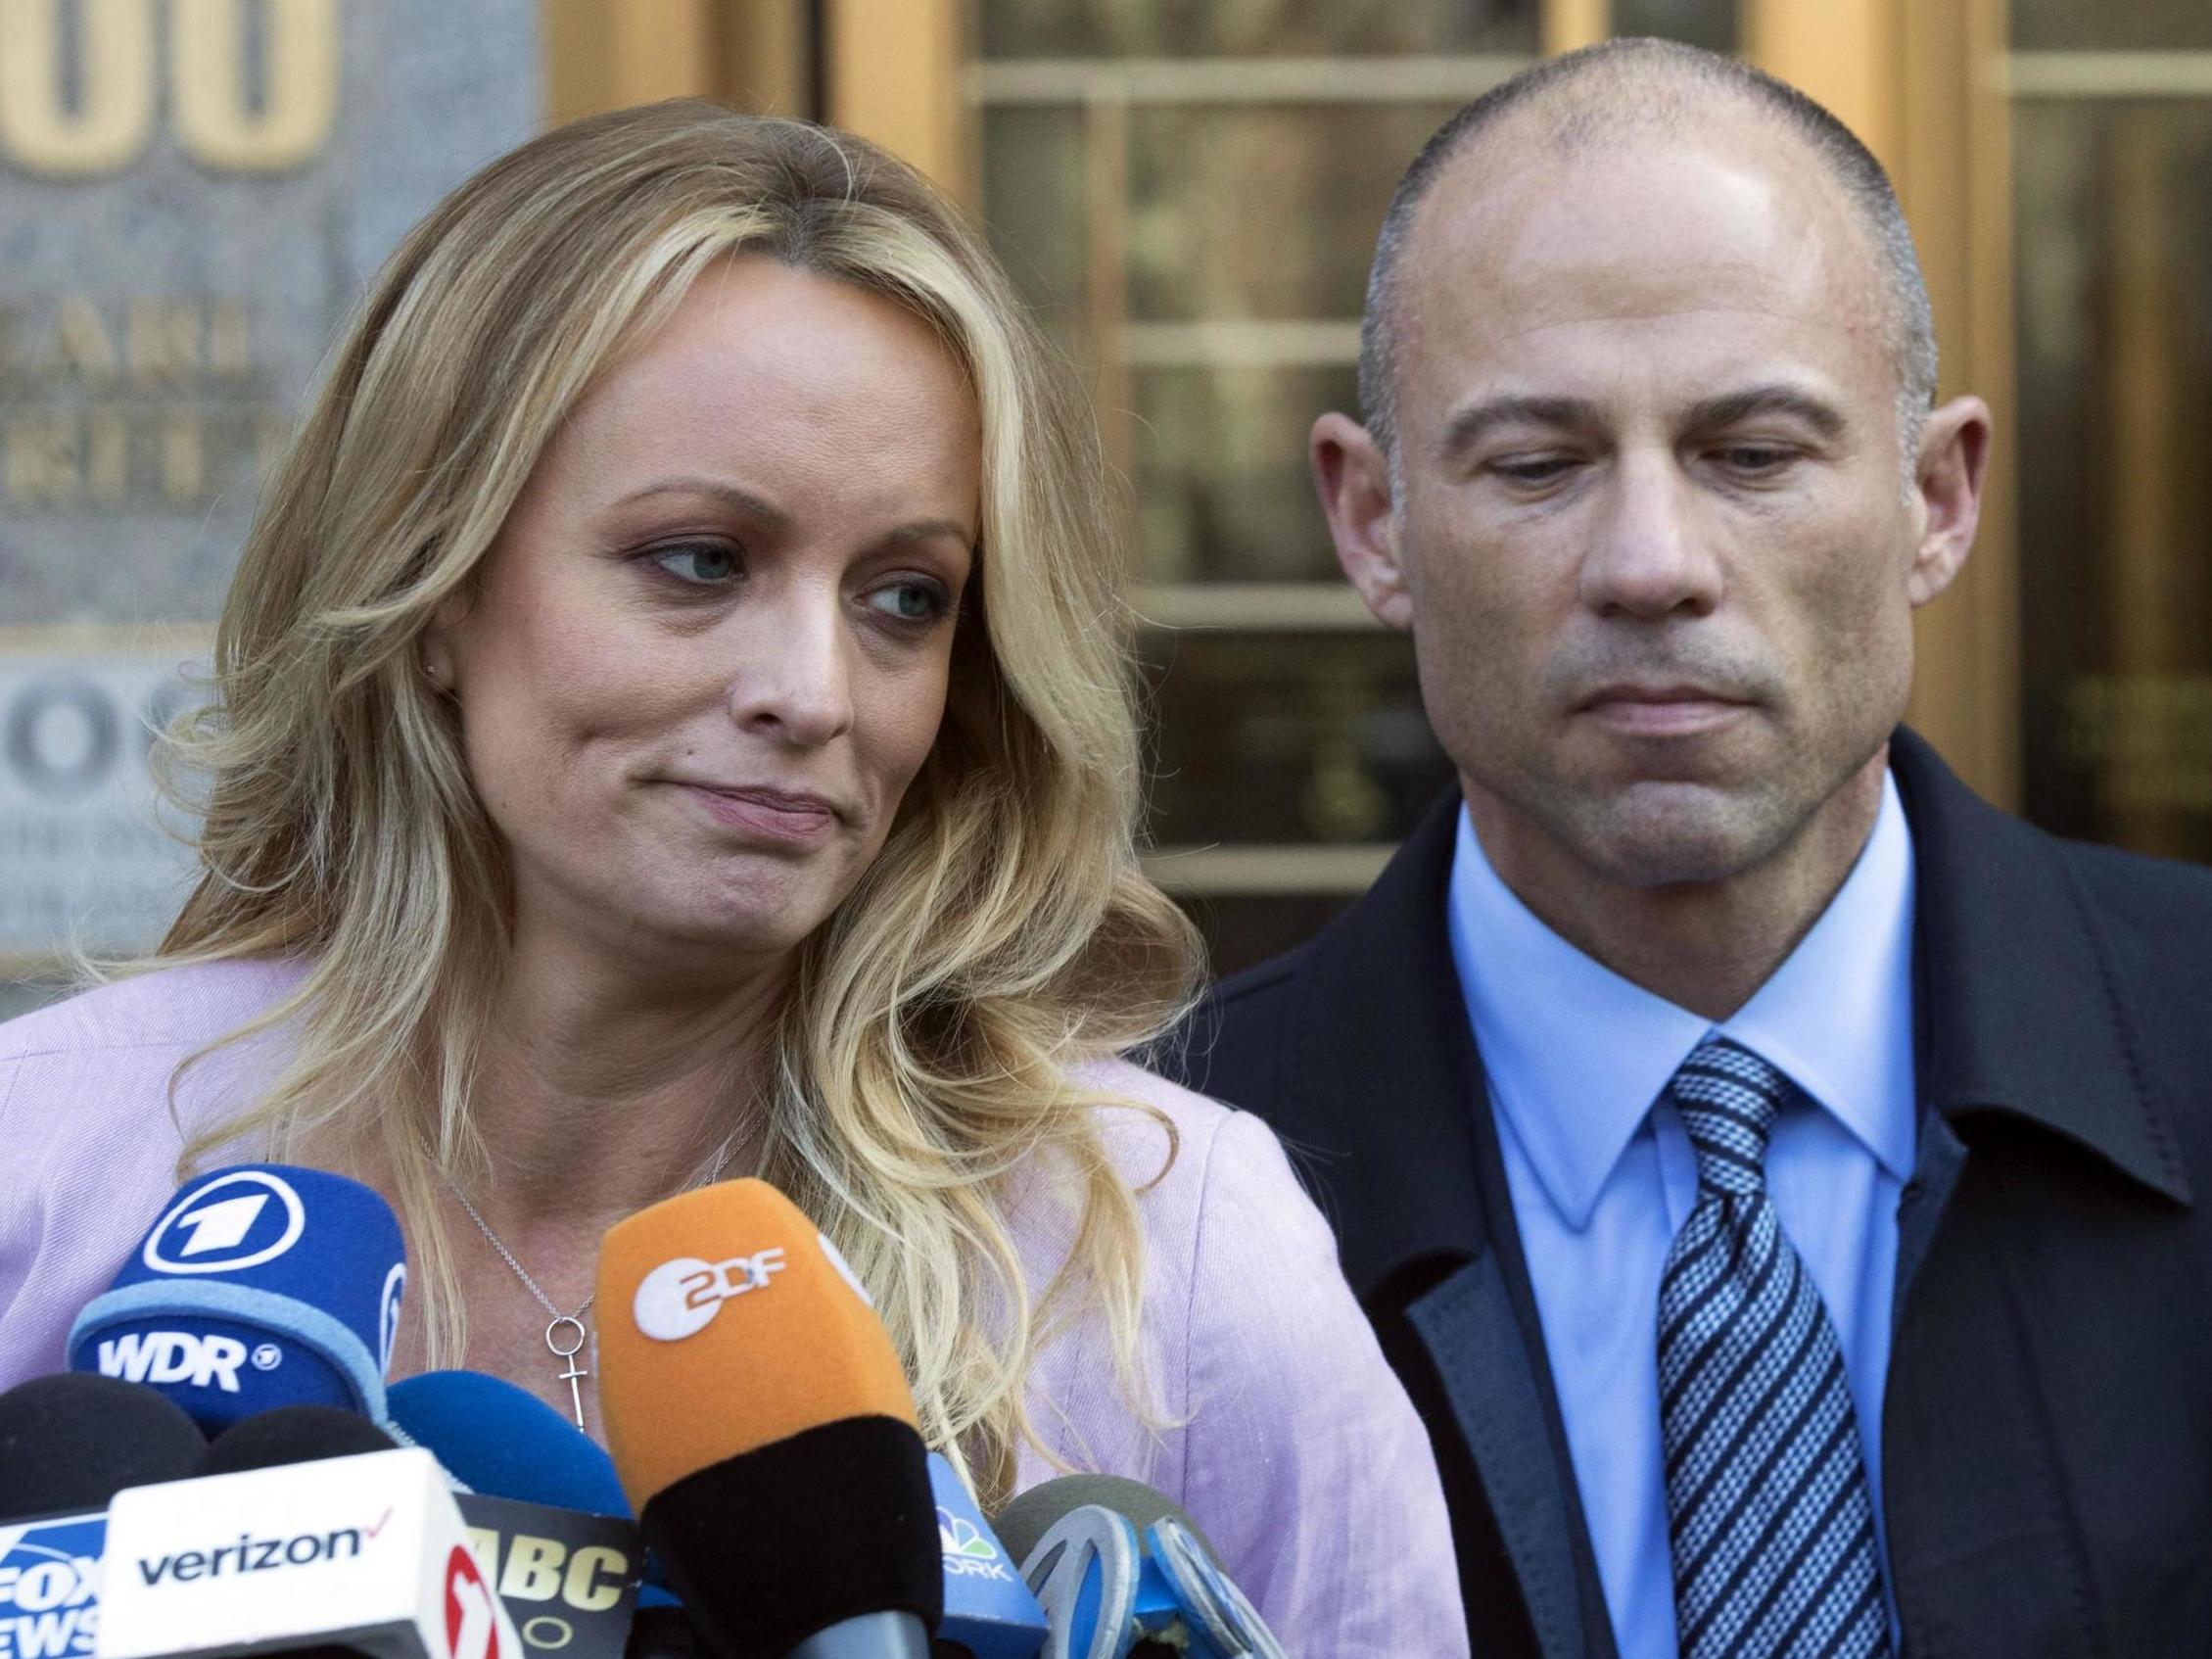 Michael Avenatti: Stormy Daniels’ former lawyer arrested in California | The Independent